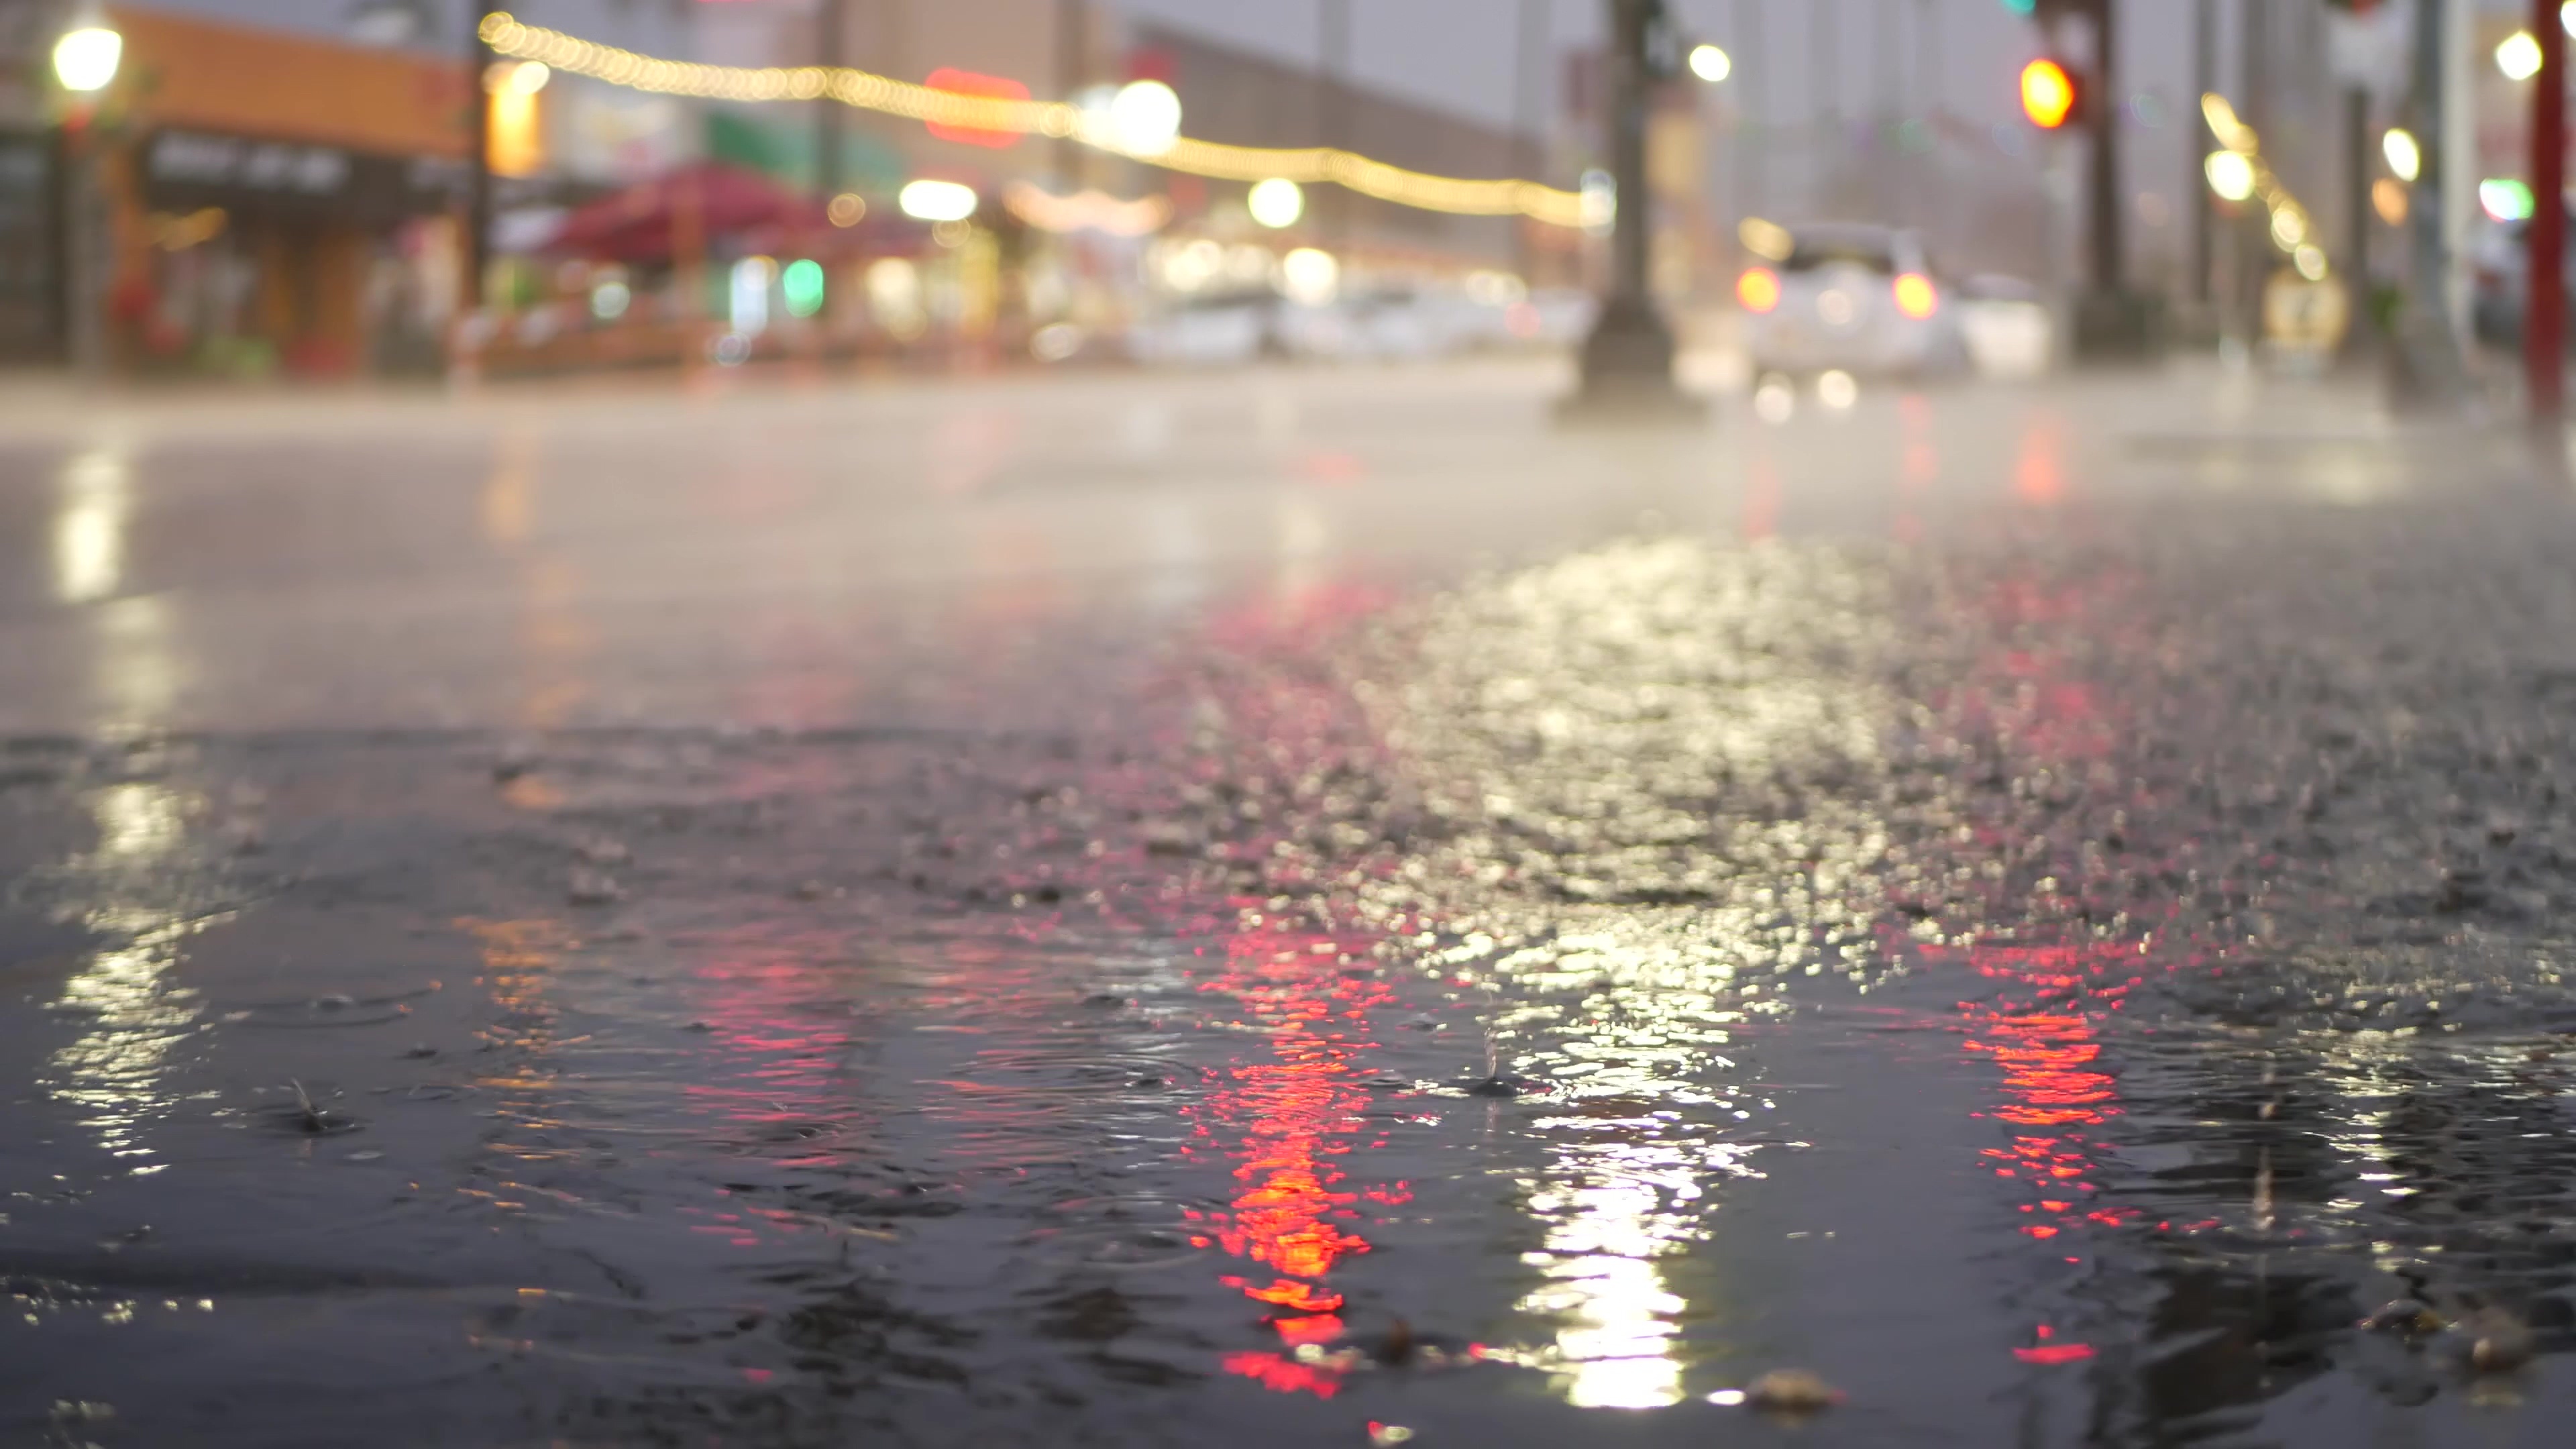 Cars lights reflection on road in rainy weather. Rain drops on wet asphalt of city street in USA, raindrops falling on sidewalk. Puddle of water on pavement. Torrential downpour or rainfall at night.